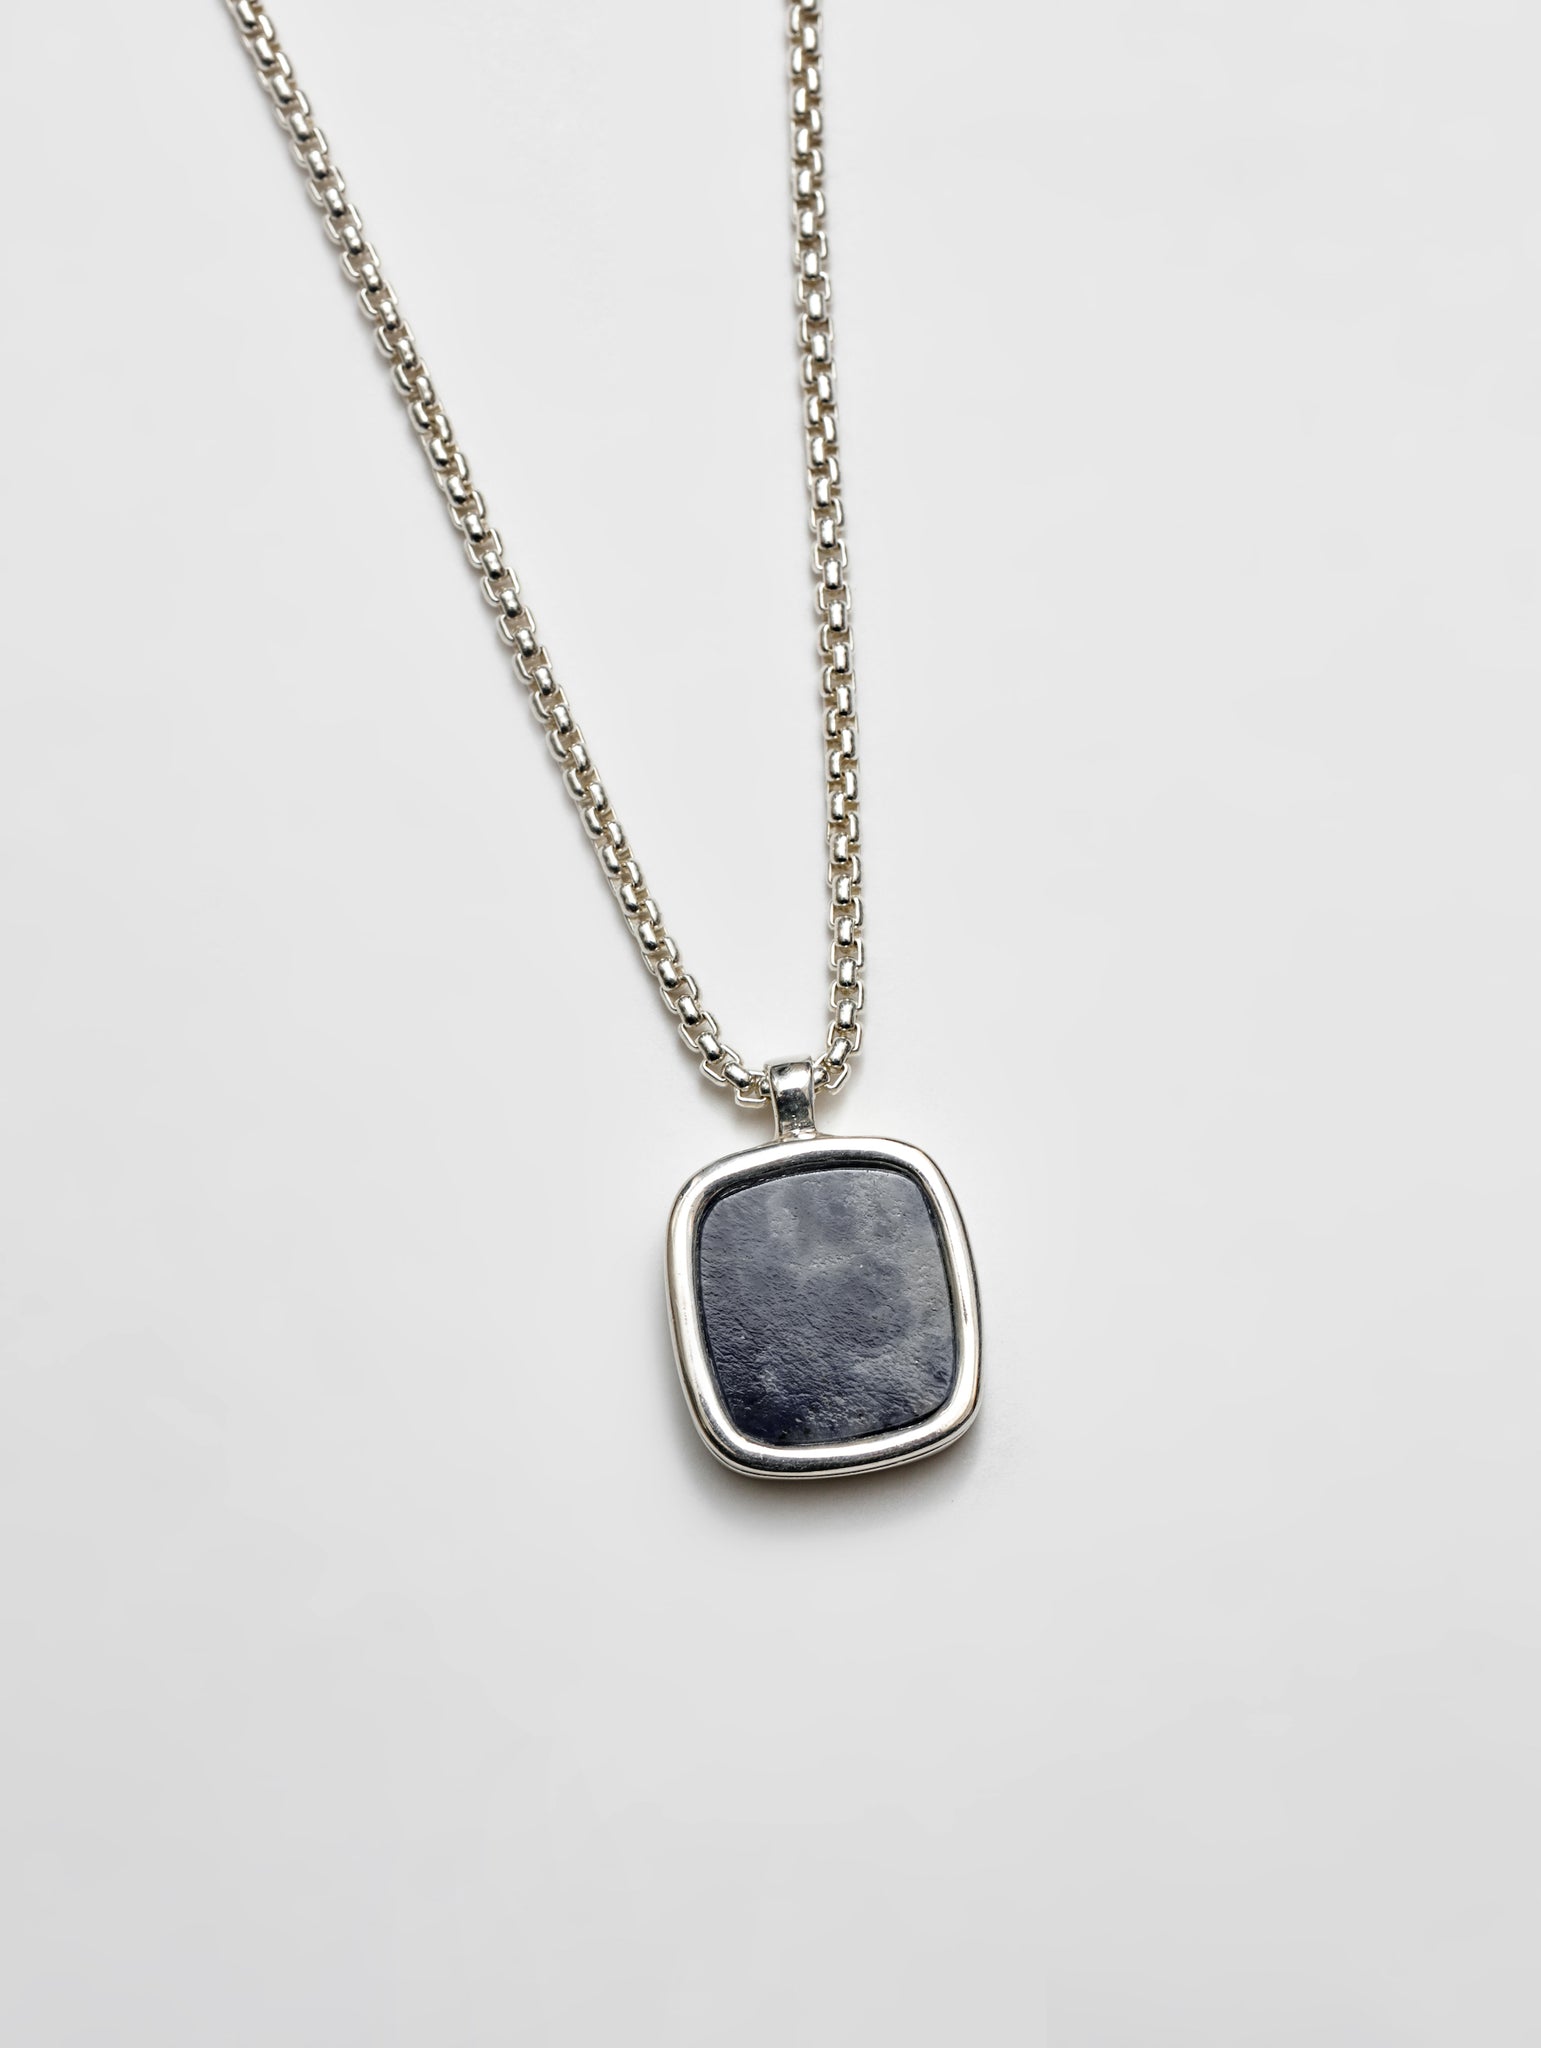 Wolf Circus Classic Unisex Square Natural Gemstone Pendant Necklace Ocean Blue Stone 925 Sterling Silver | Wells Necklace in Sodalite and Sterling Silver-Necklaces-wolfcircus.com